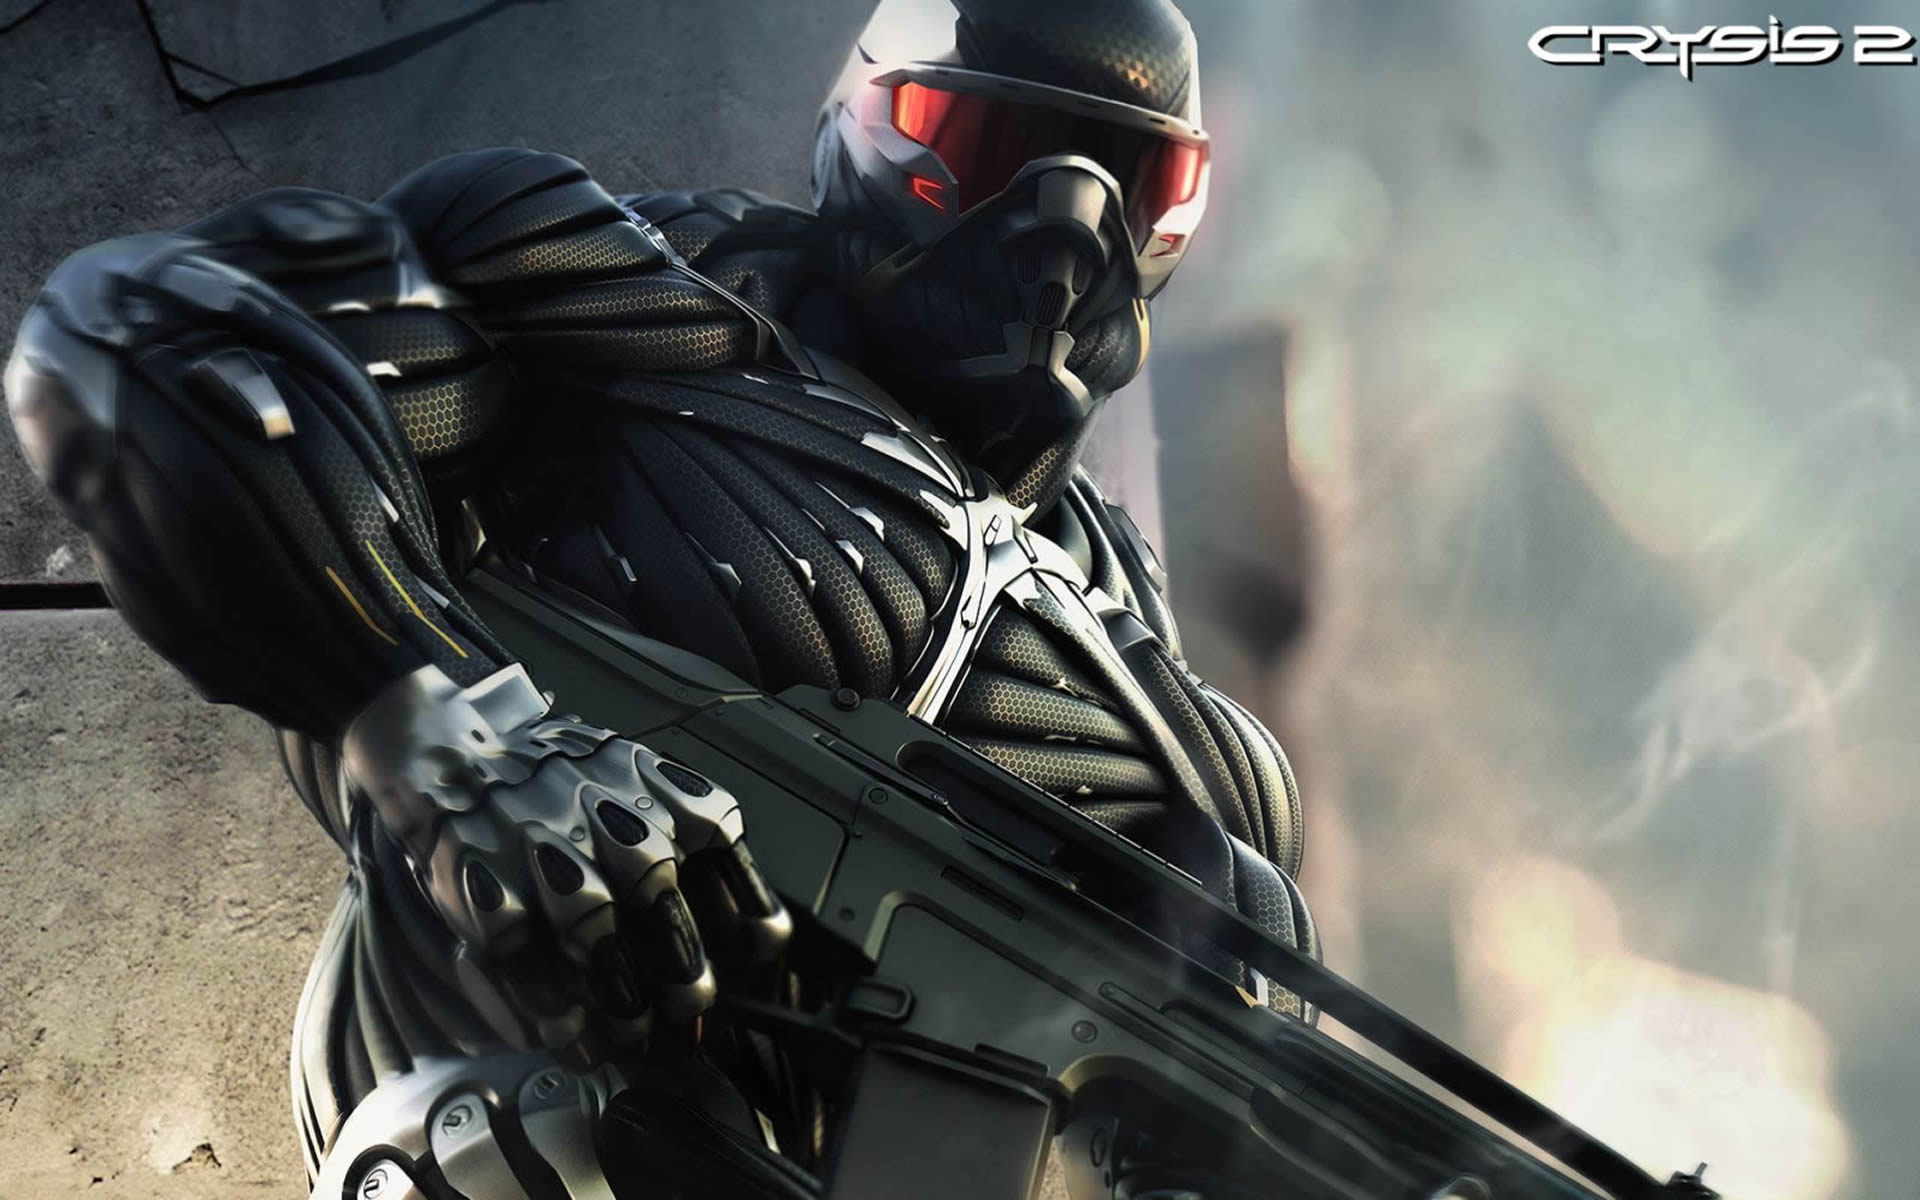 Soldier With Gun - Action Games Wallpaper Image featuring Crysis 2